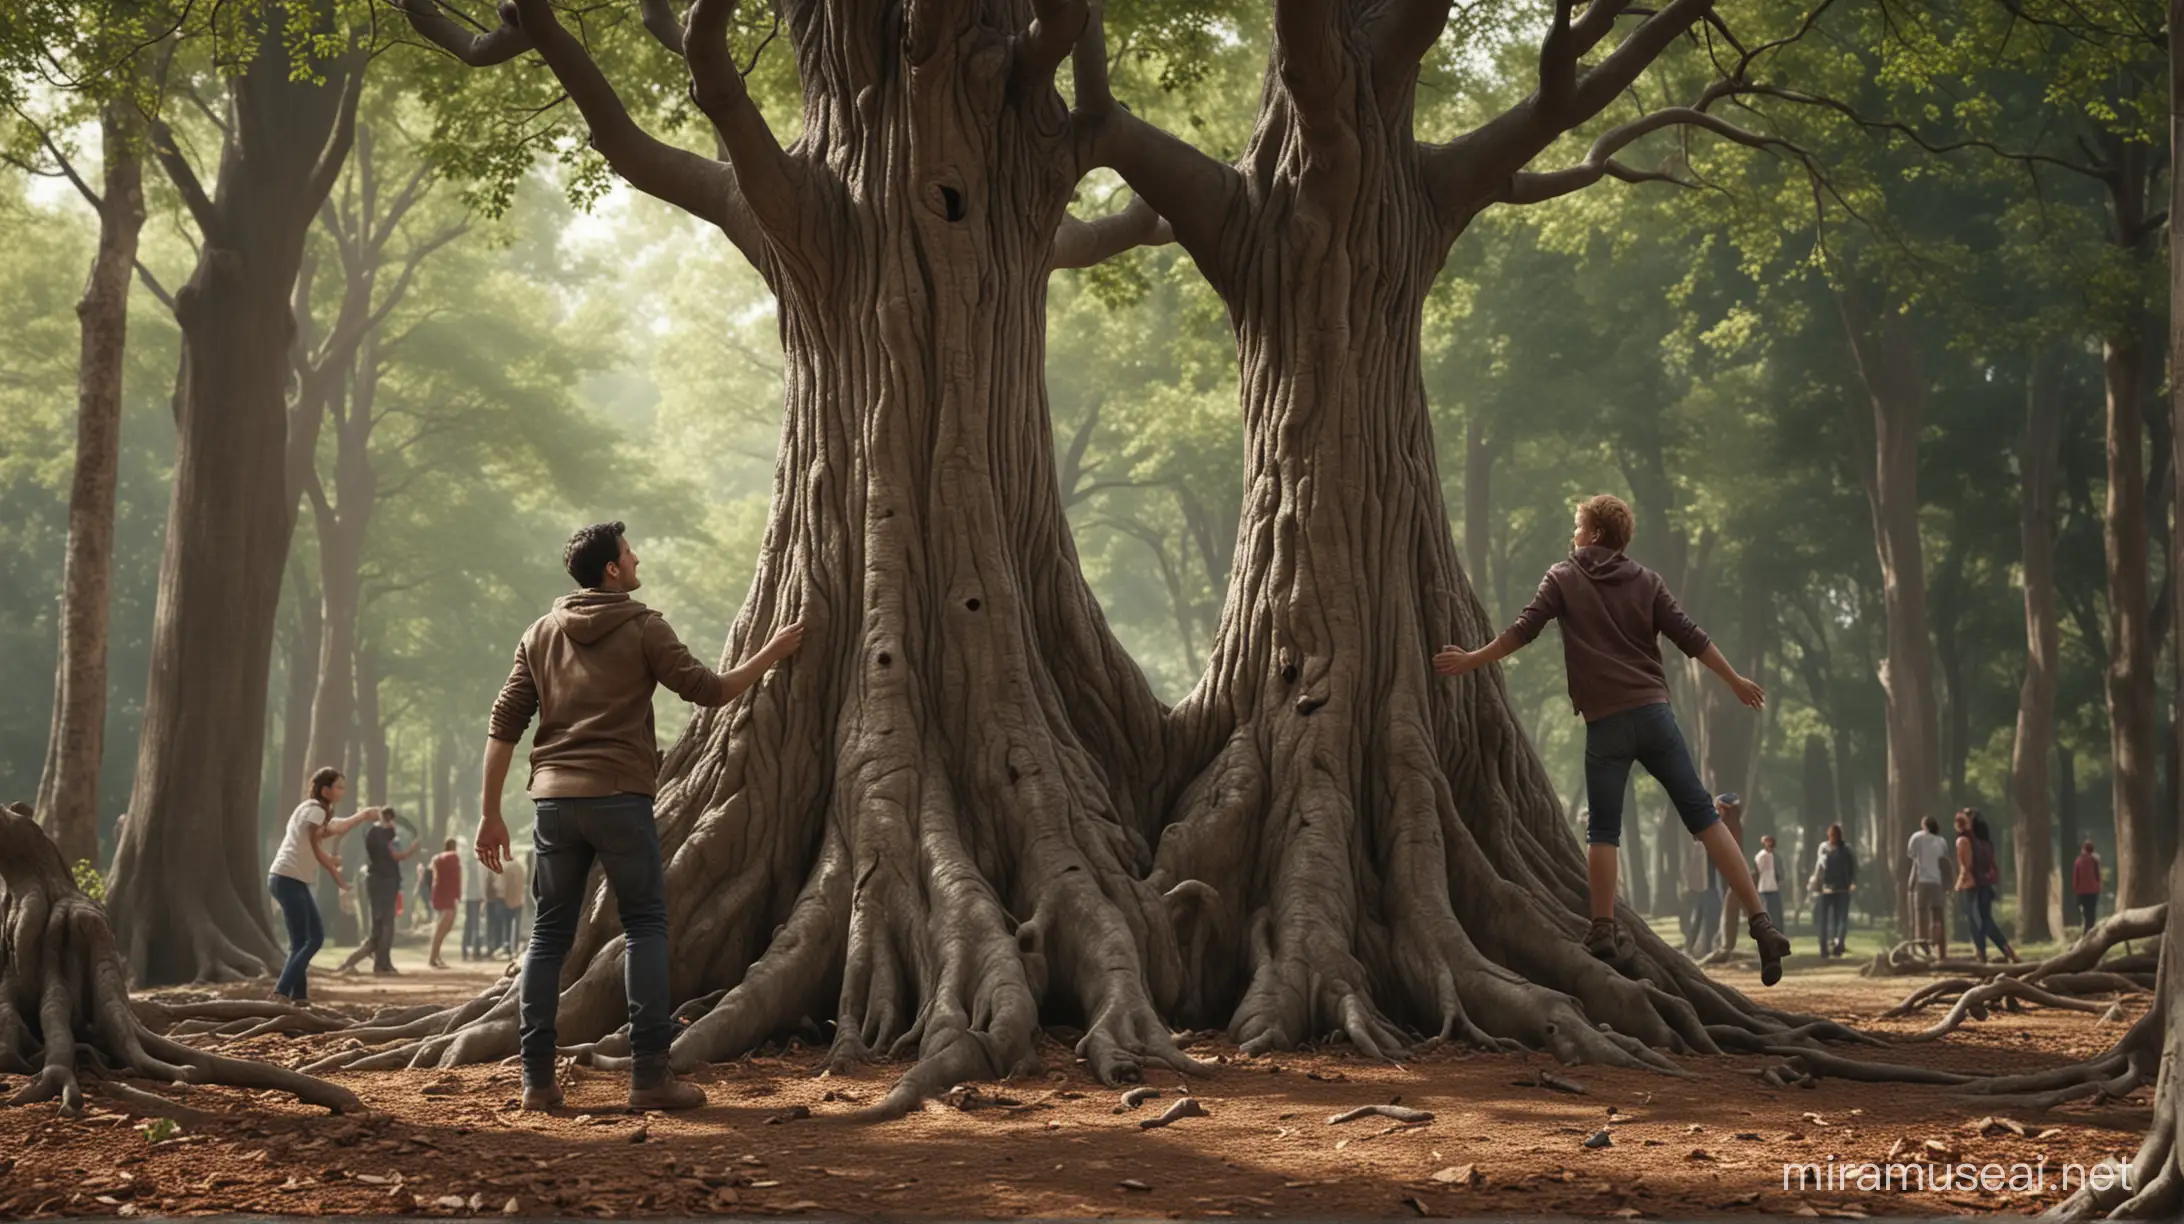 photorealistic image of people gatheing around a tree holding each others hand, canon 5d, 